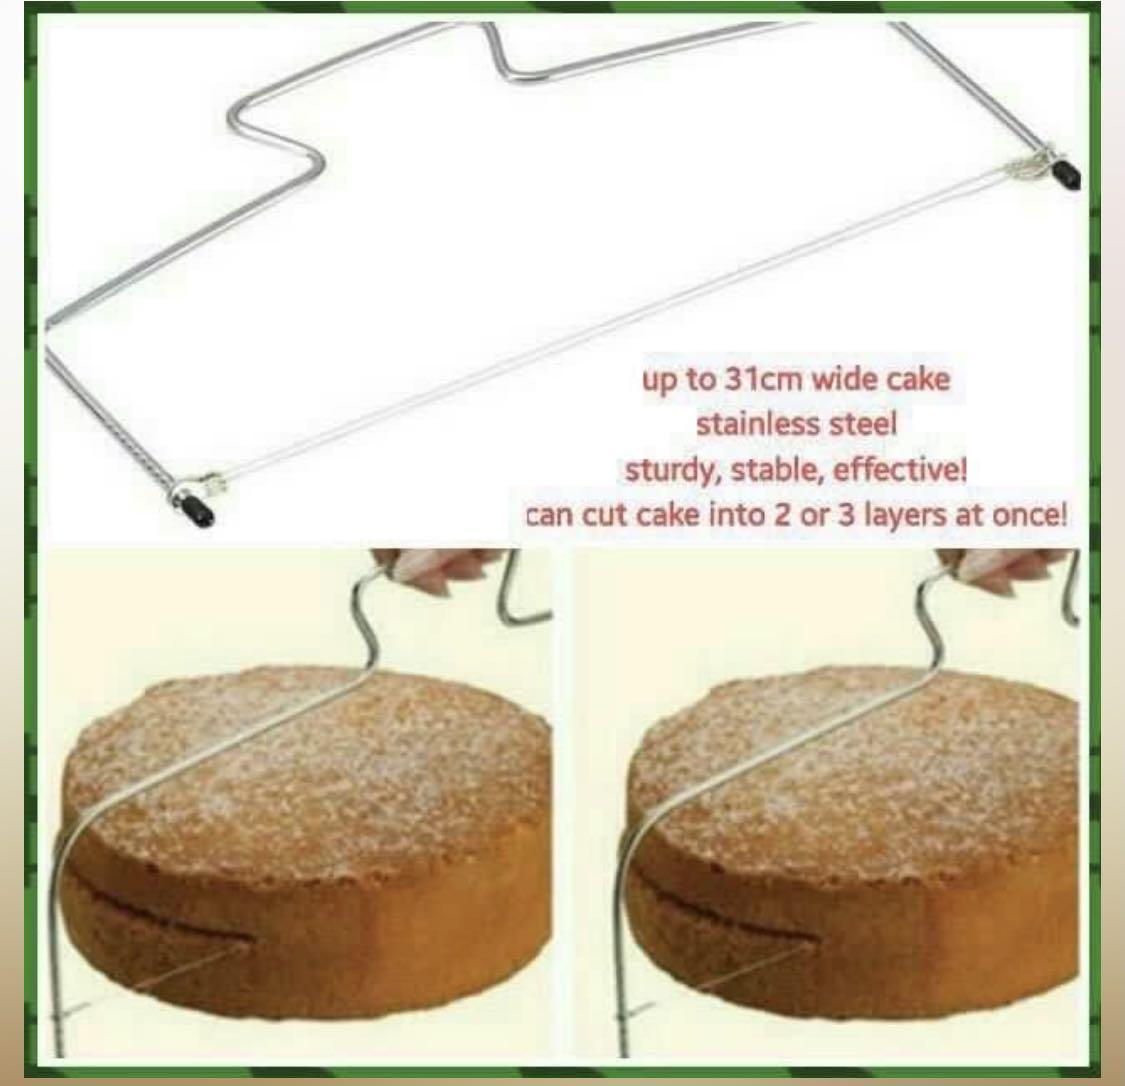 Amazon.com: Cake Leveler, Caliamary Adjustable Cake Leveler & Slicer  Cutter, Layer Cake Decorating Leveler Cutter Slicer with Stainless Steel  Wires and Handle, Baking Tools for 10 Inch Cake, 11.8 x 6.5 inches: